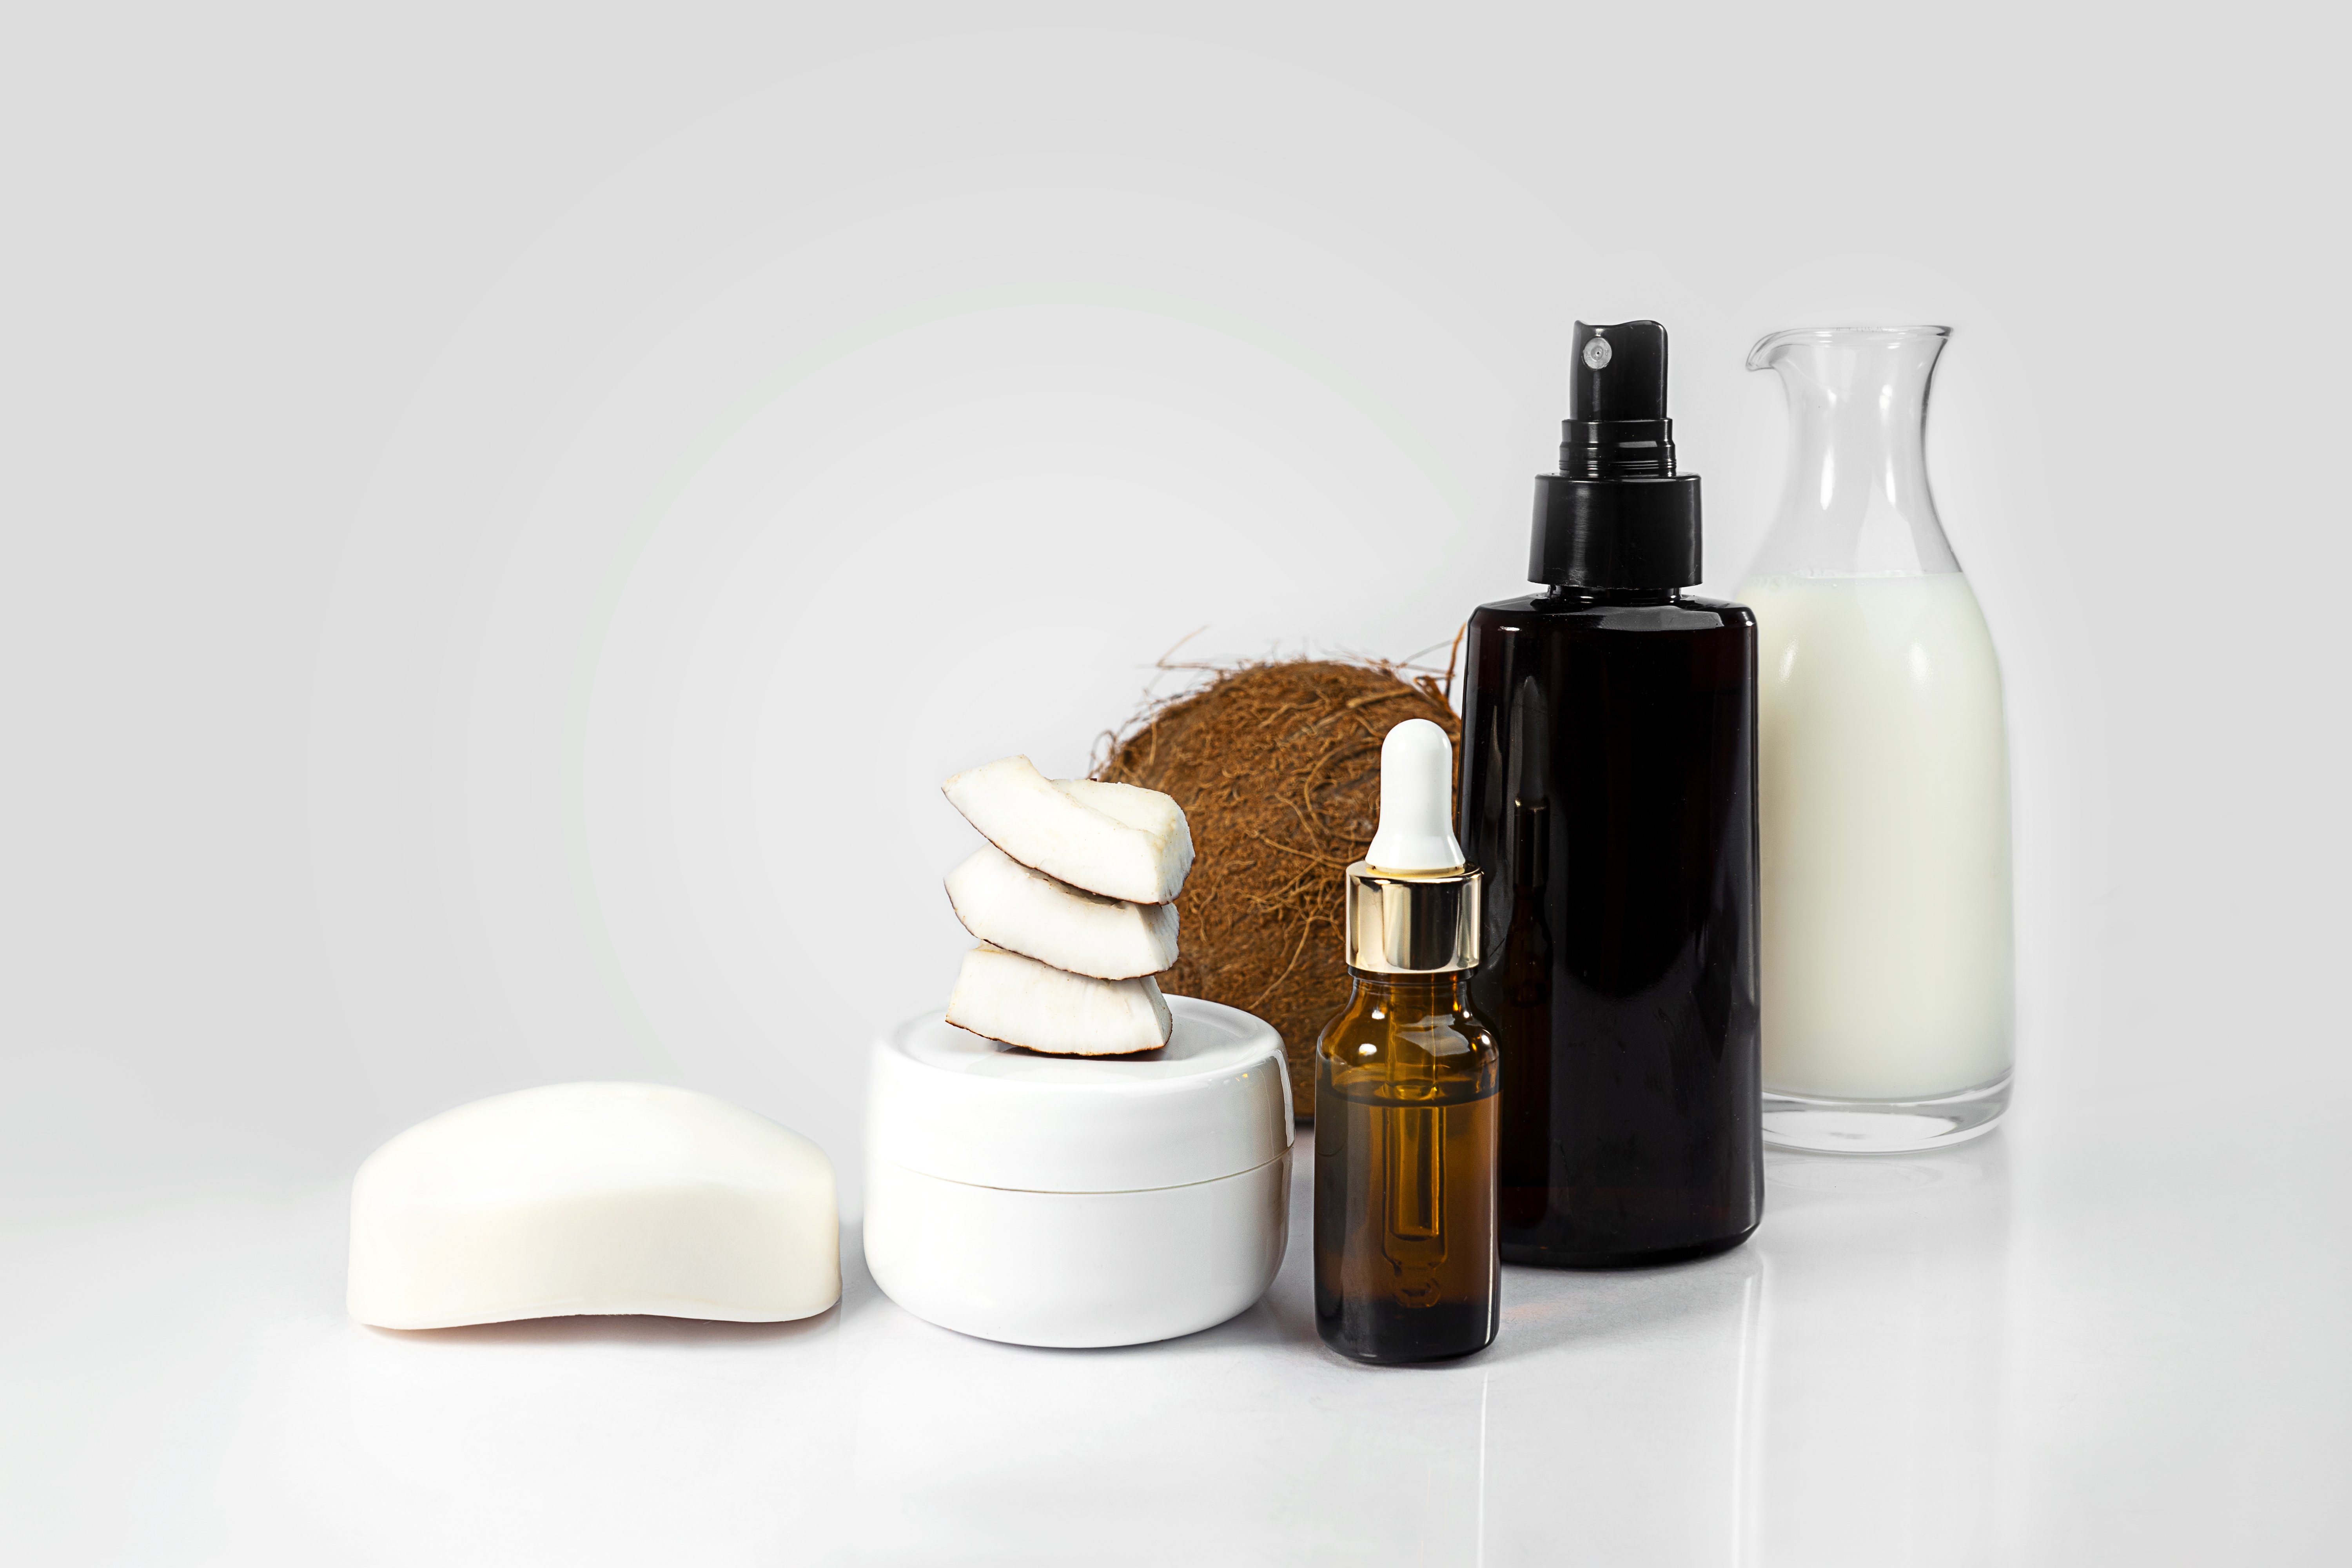 Products with coconut oil. | Source: Getty Images